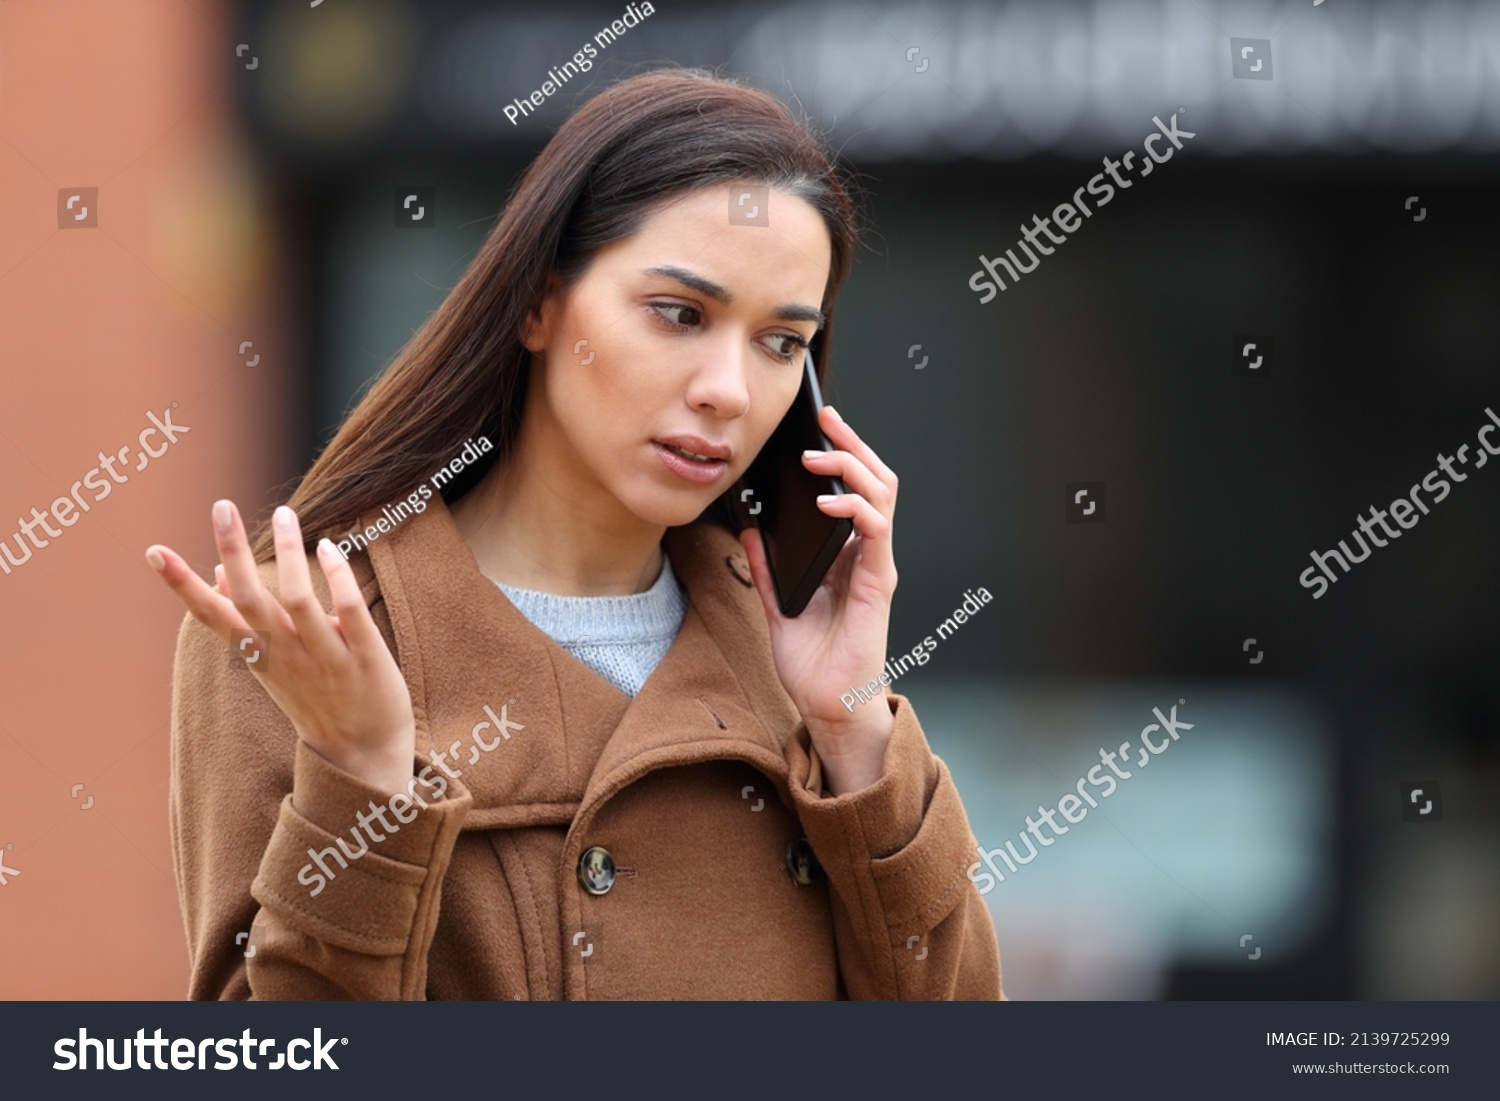 Angry woman in the street talking on mobile phone complaining #2139725299